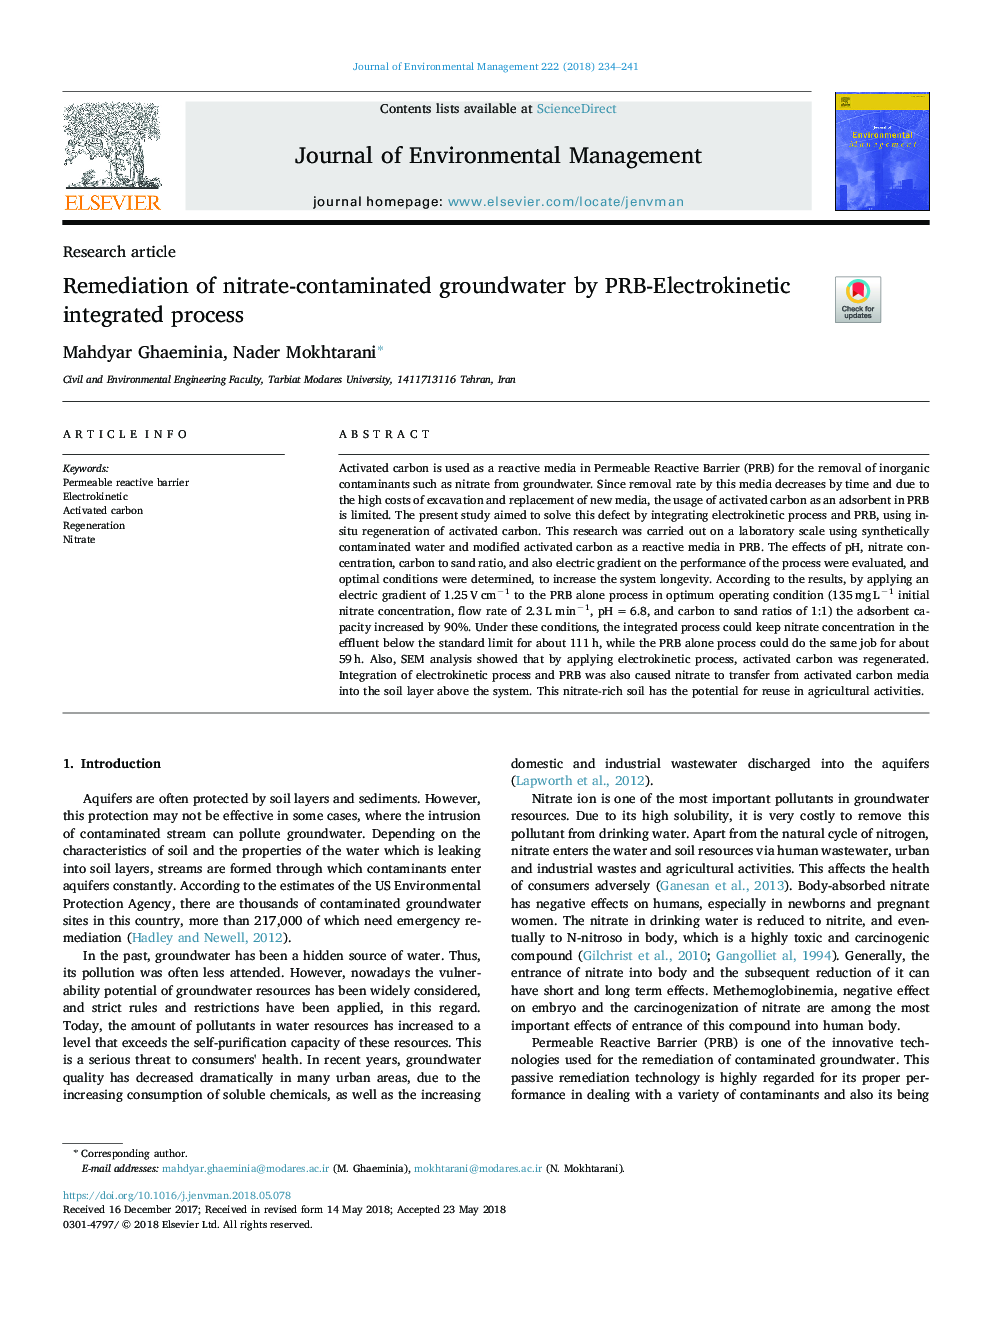 Remediation of nitrate-contaminated groundwater by PRB-Electrokinetic integrated process